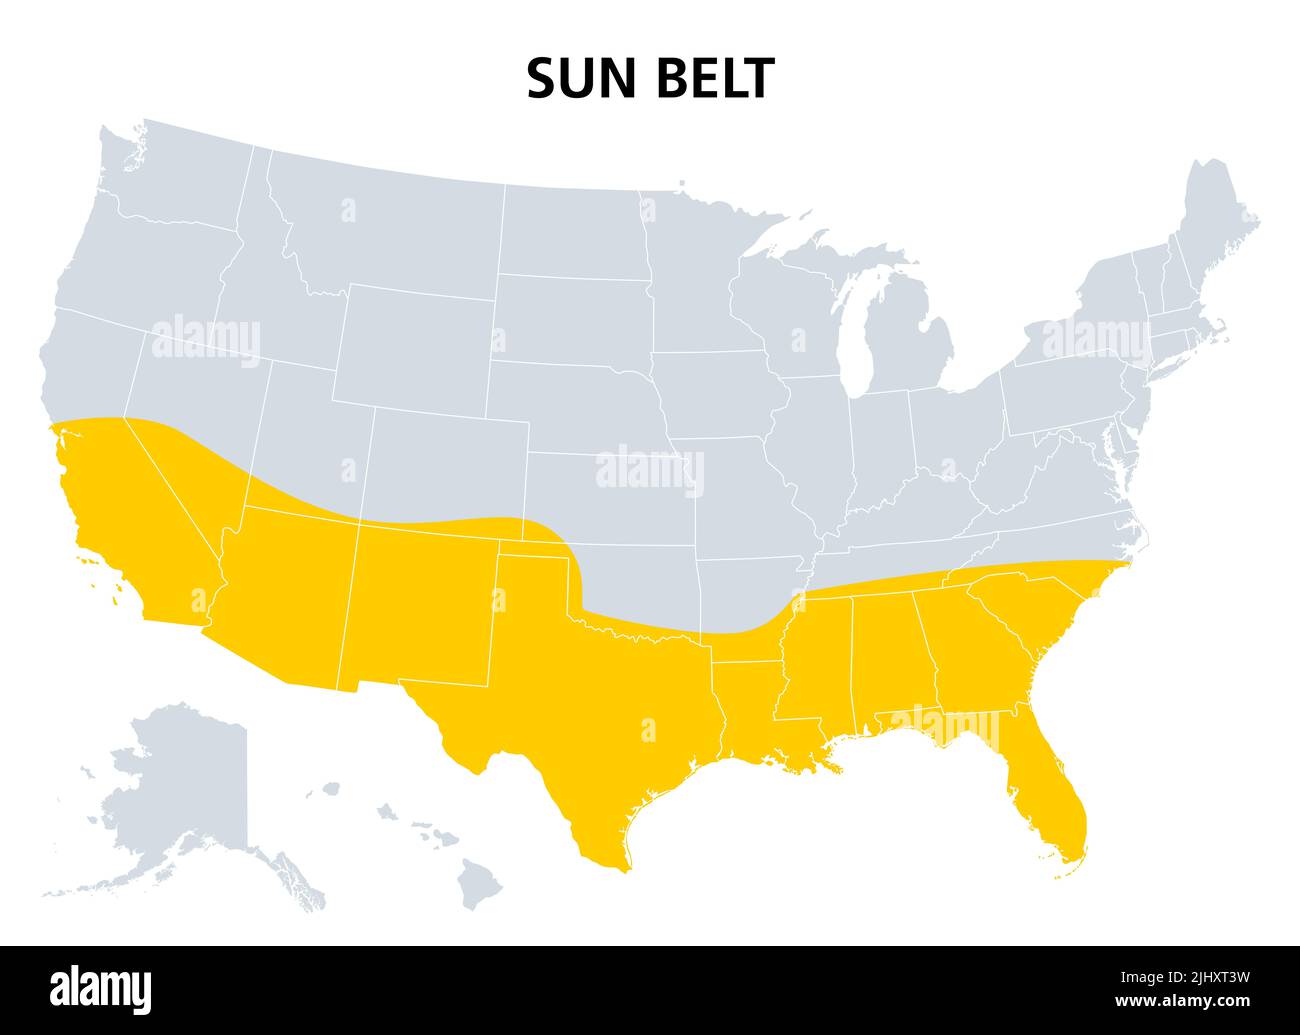 Sun Belt of the United States, political map. Region with desert, subtropical and tropical climate, comprising the southernmost states. Stock Photo